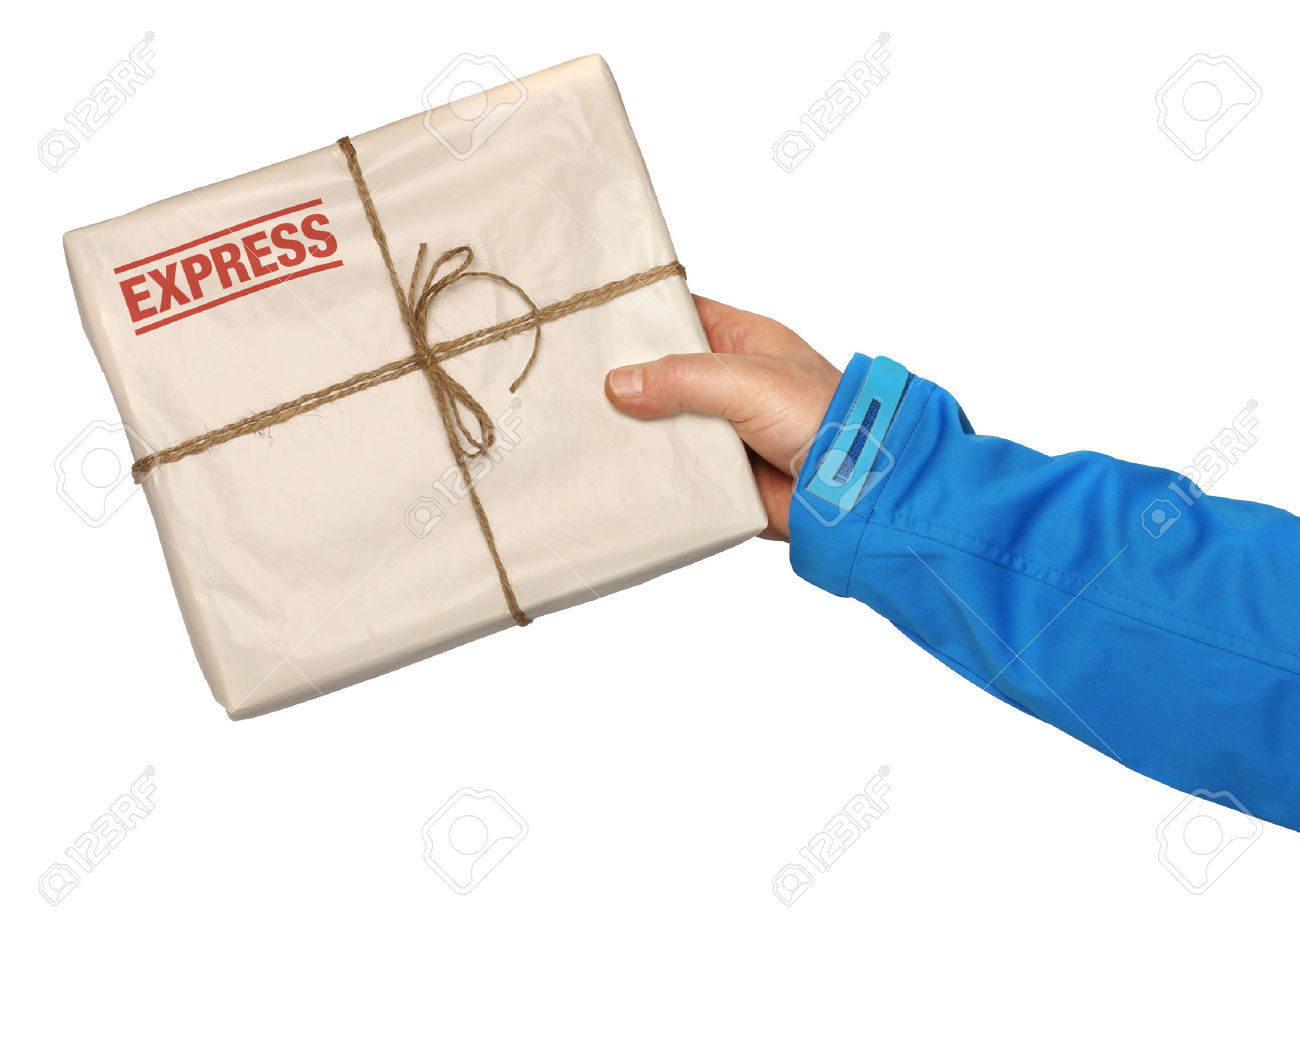 Package Express